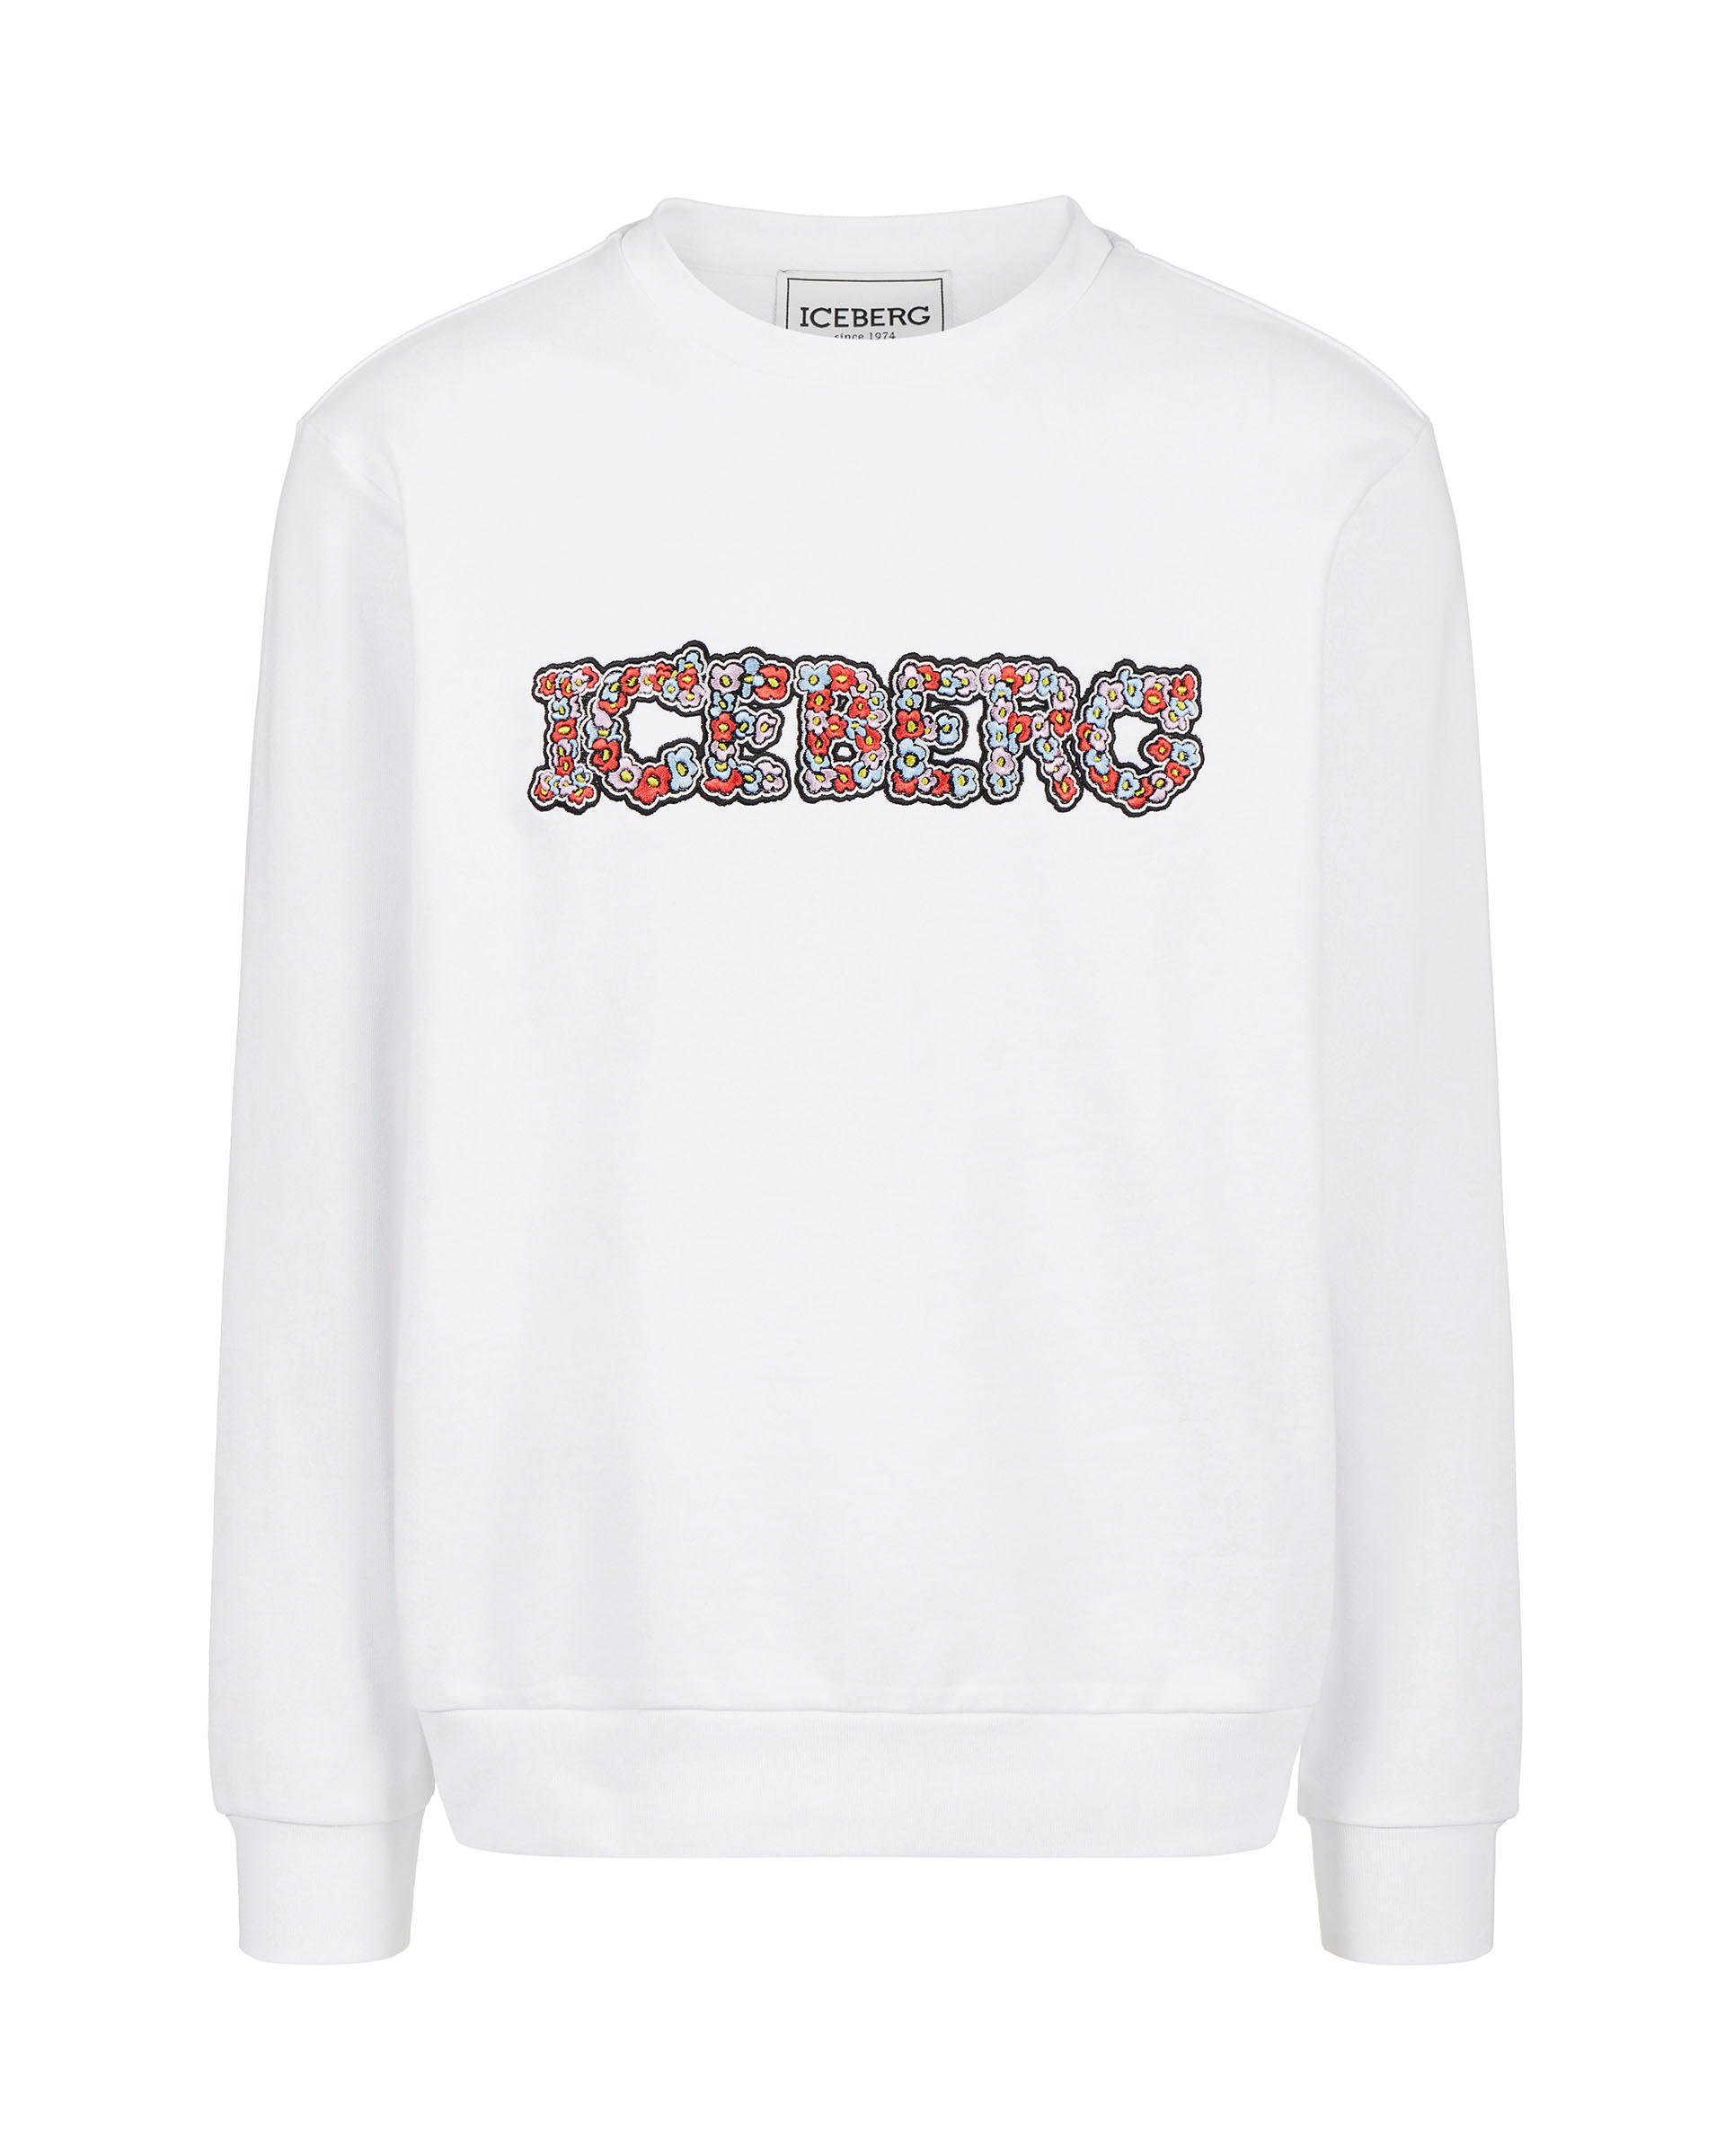 Sweatshirt with floral logo | Iceberg - Official Website